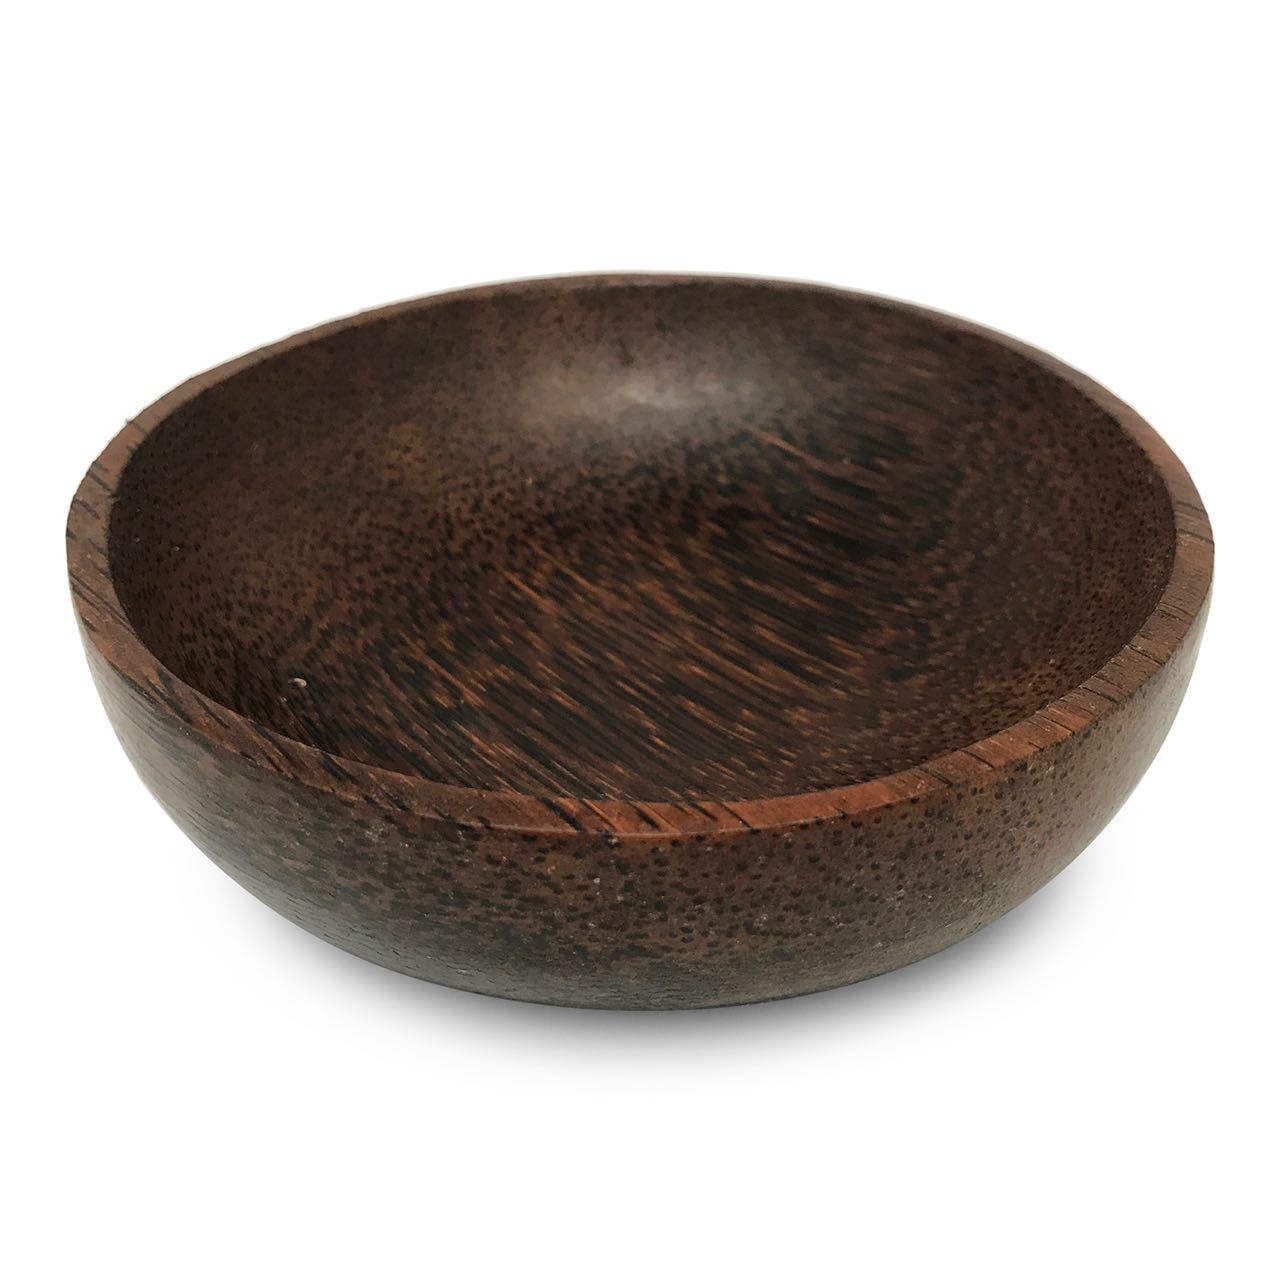 coconut wood bowls - trips and trinkets